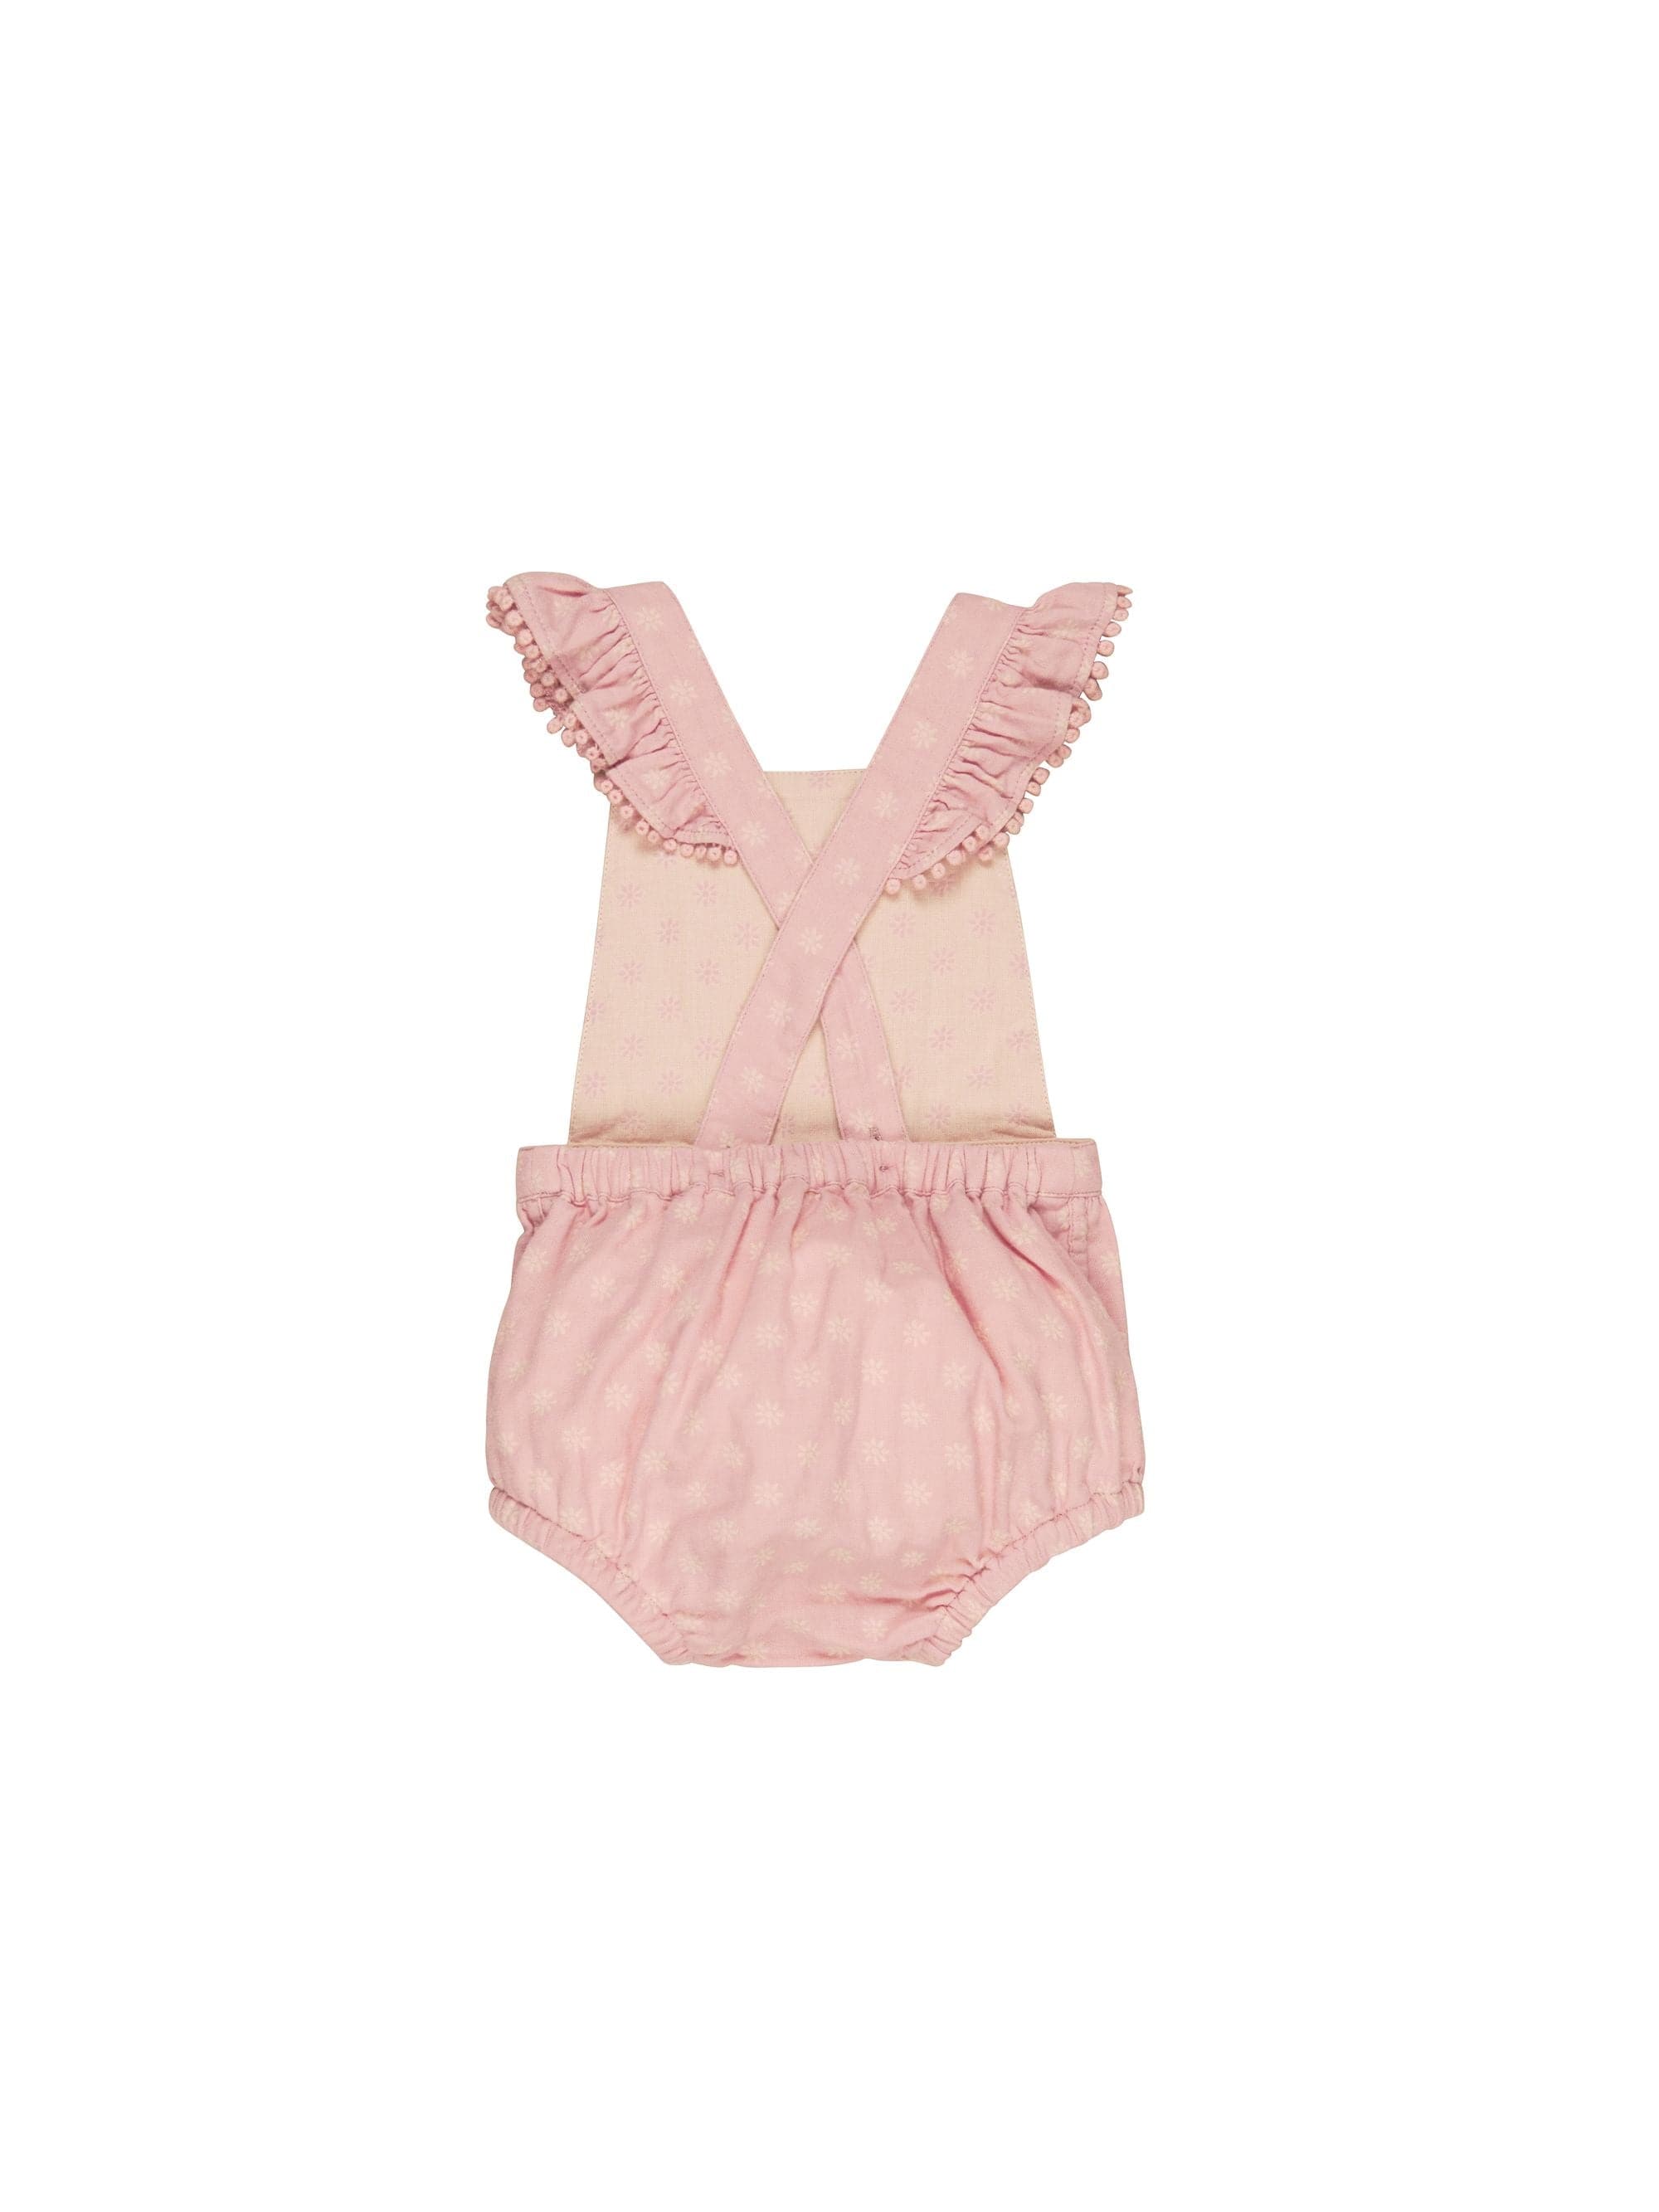 Huxbaby Girls All In One Daisy Reversible Playsuit